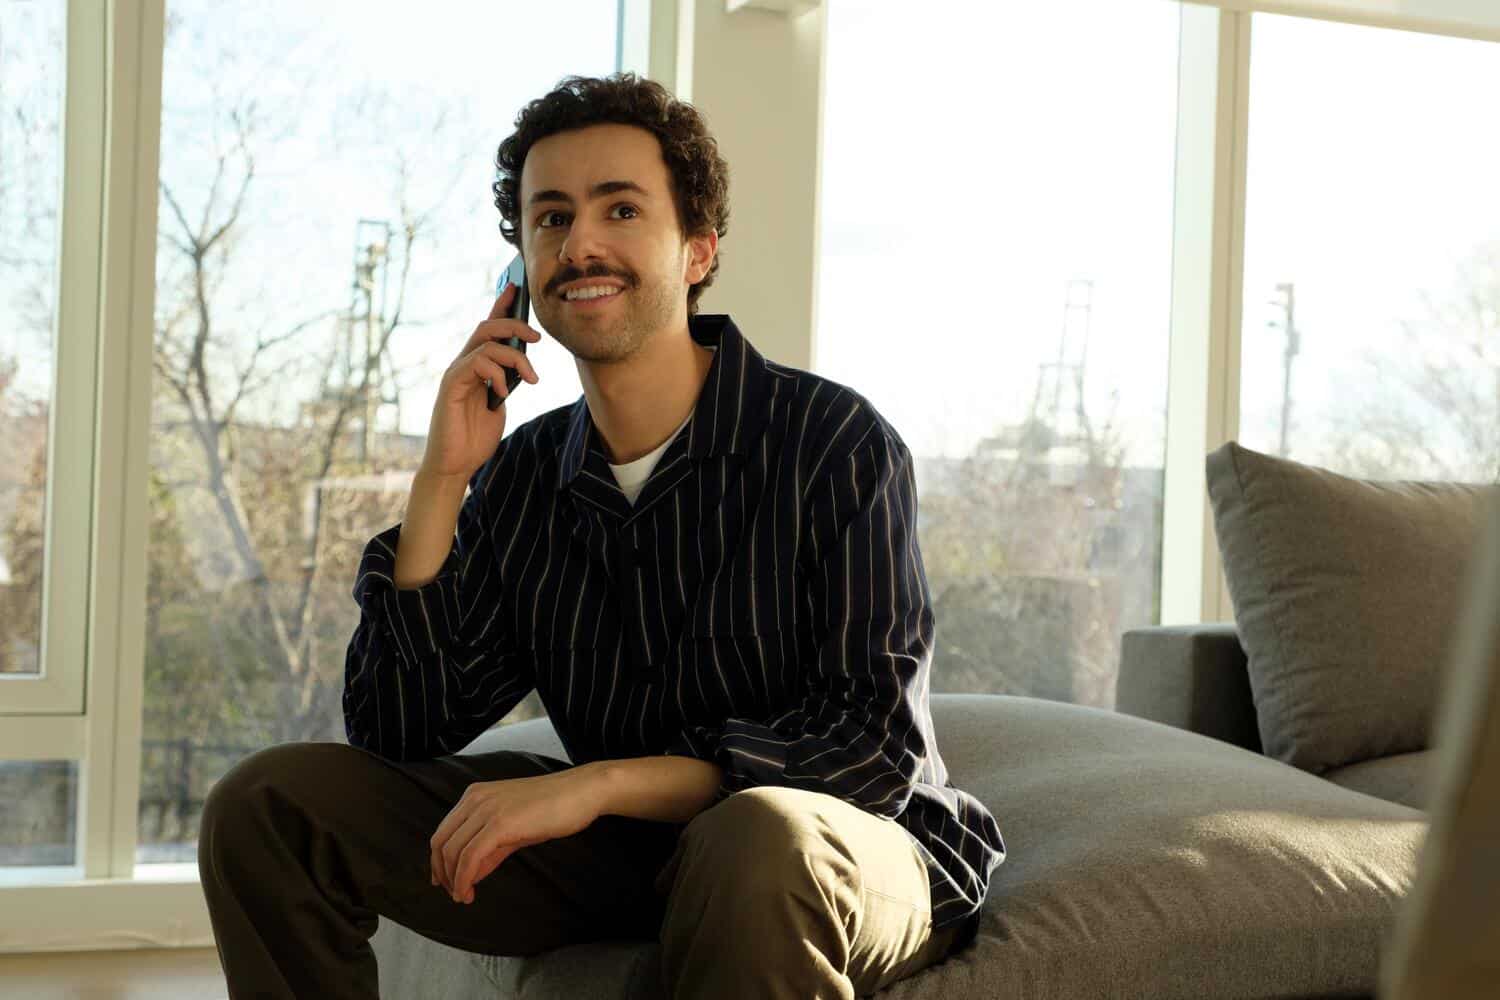 A man sits on the couch and talks on a smartphone in this image from A24 Television.